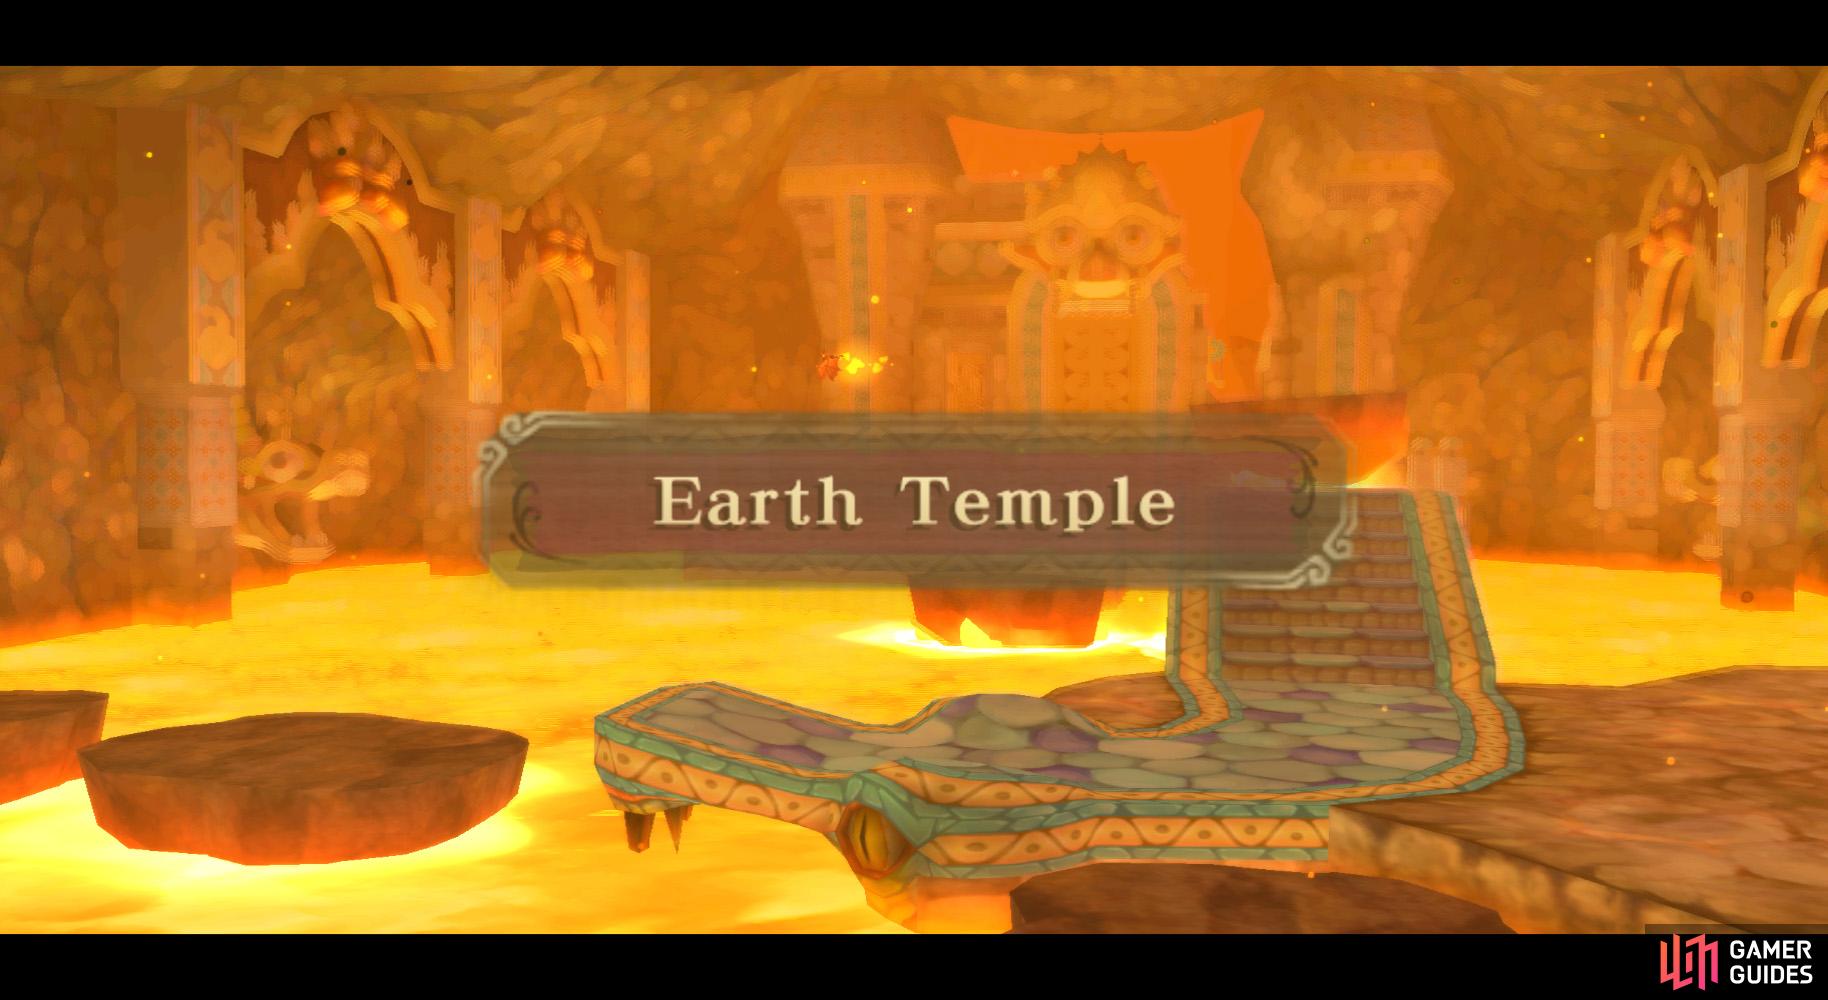 The Earth Temple is the counterpart of the Skyview Temple.